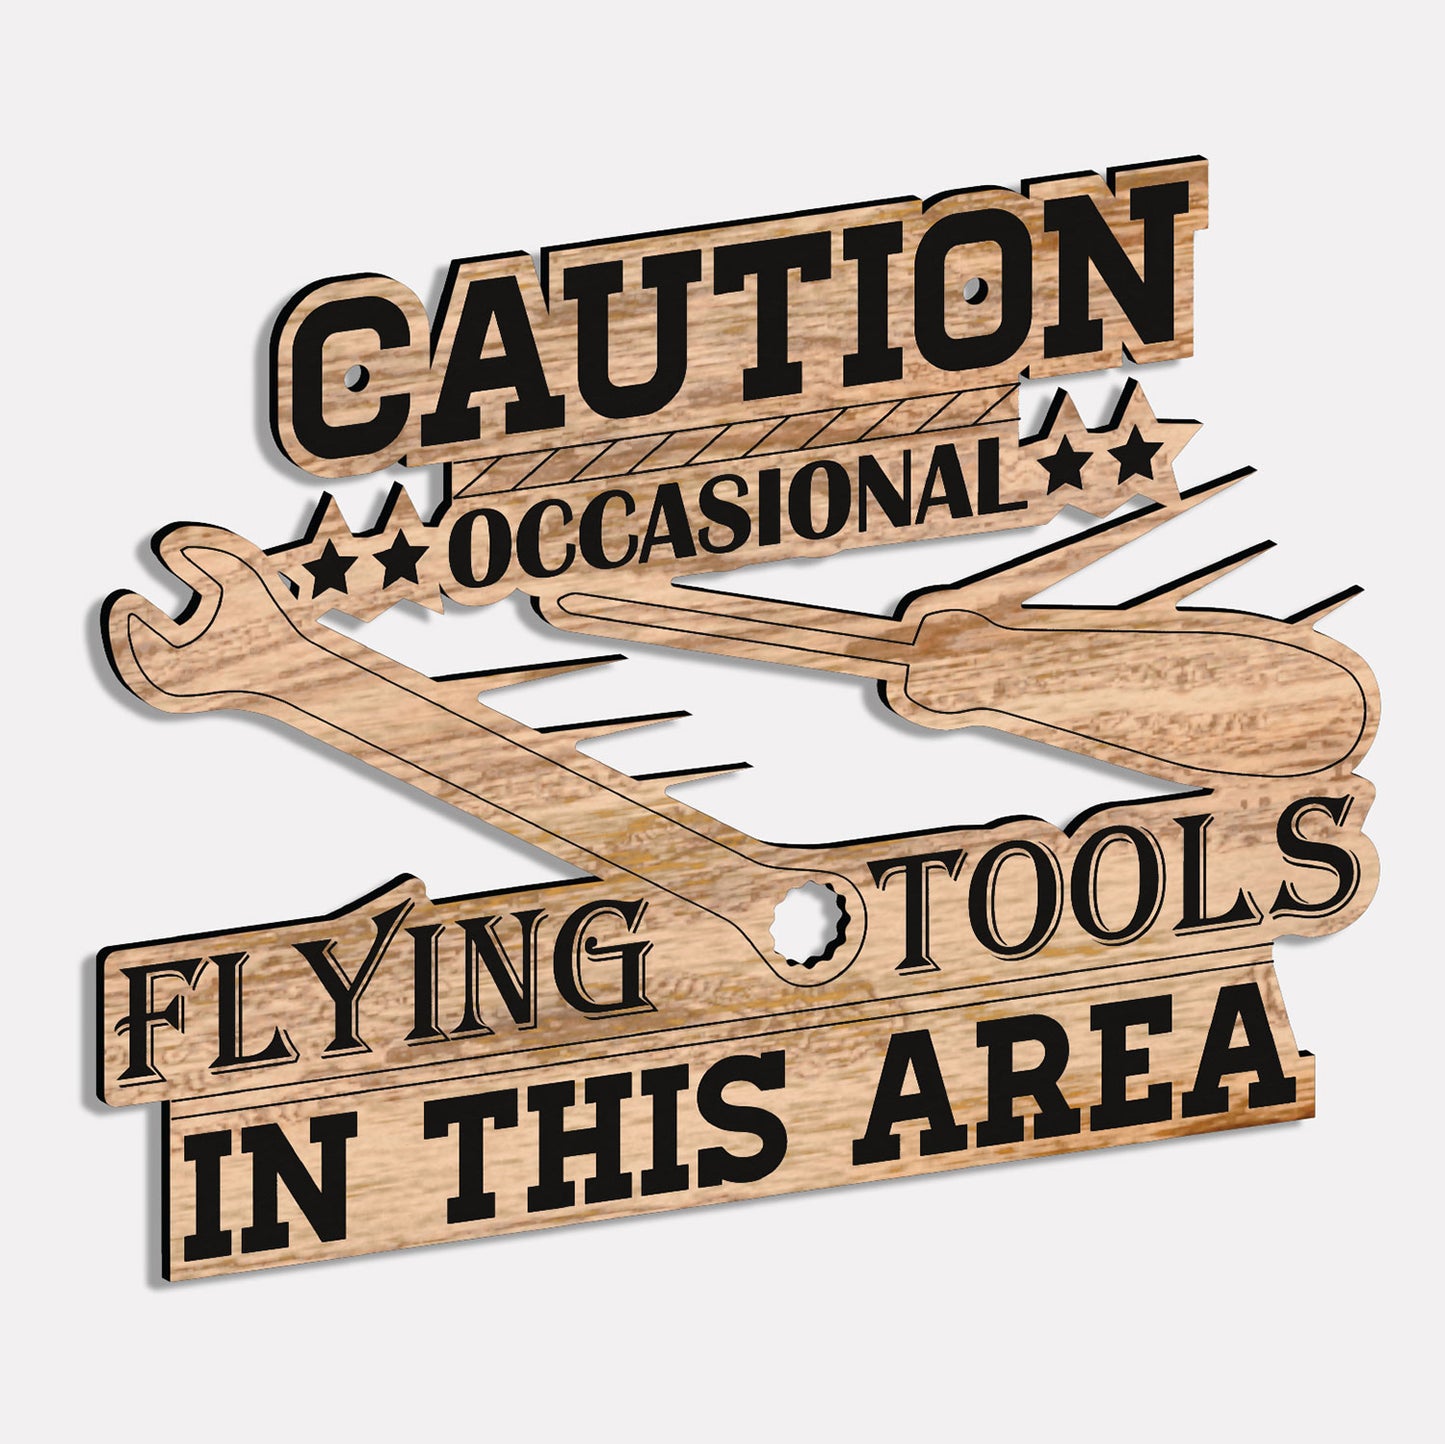 Hilarious Flying Tools Dad's Tool Shed / Workshop Sign